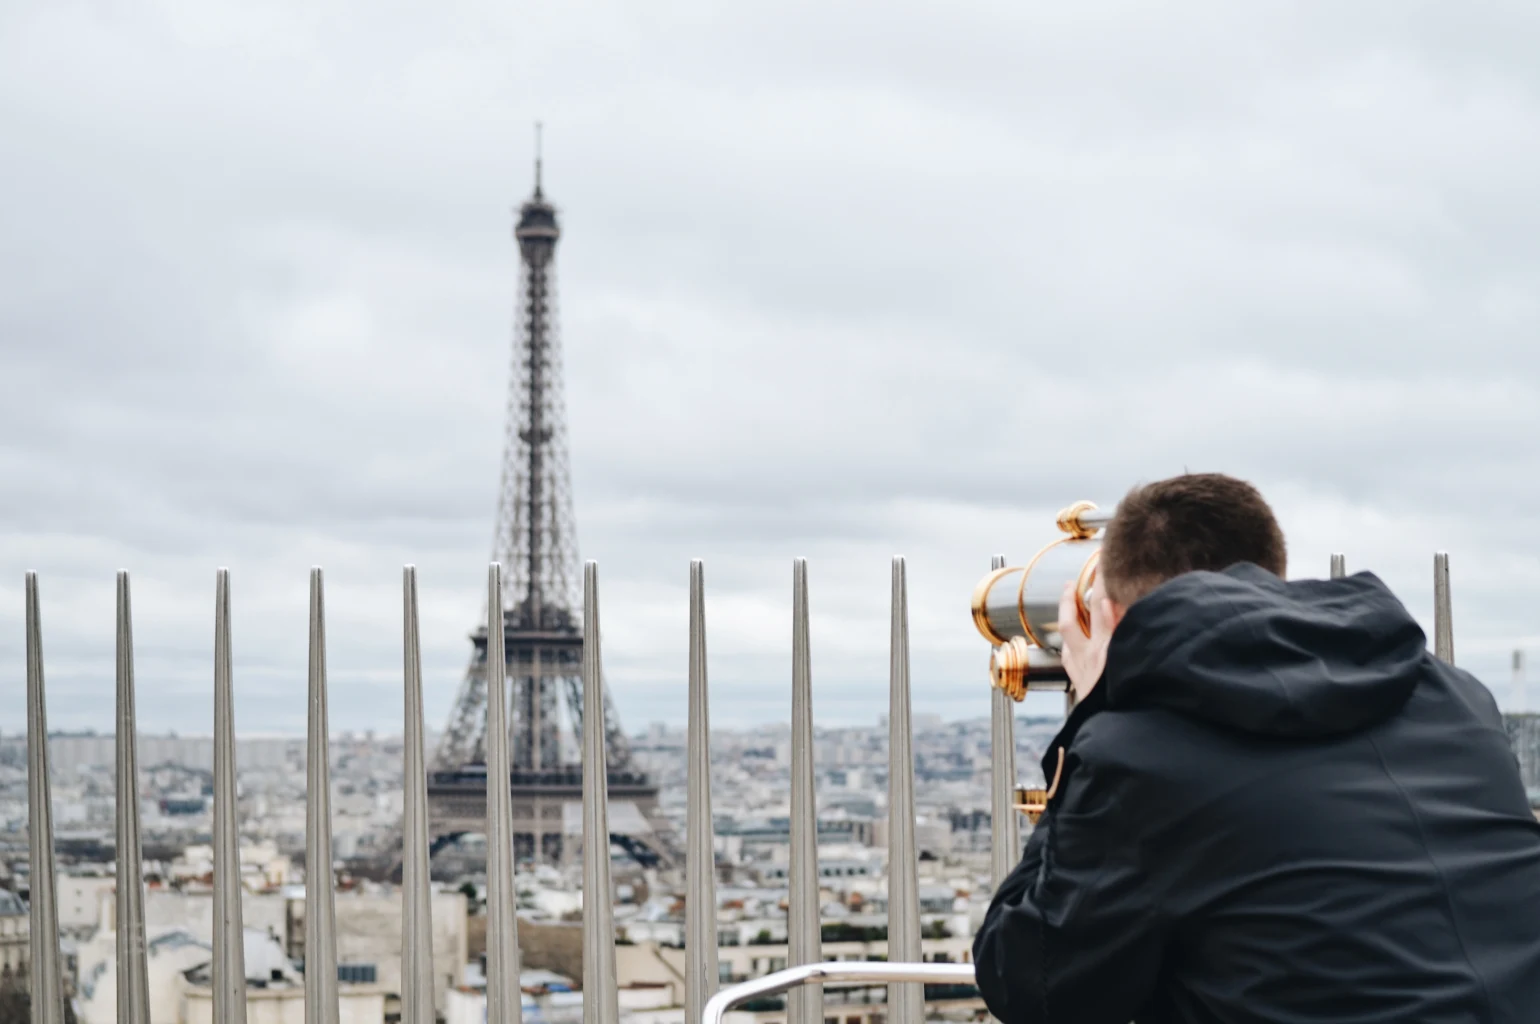 A student viewing the Eiffel Tower from afar.